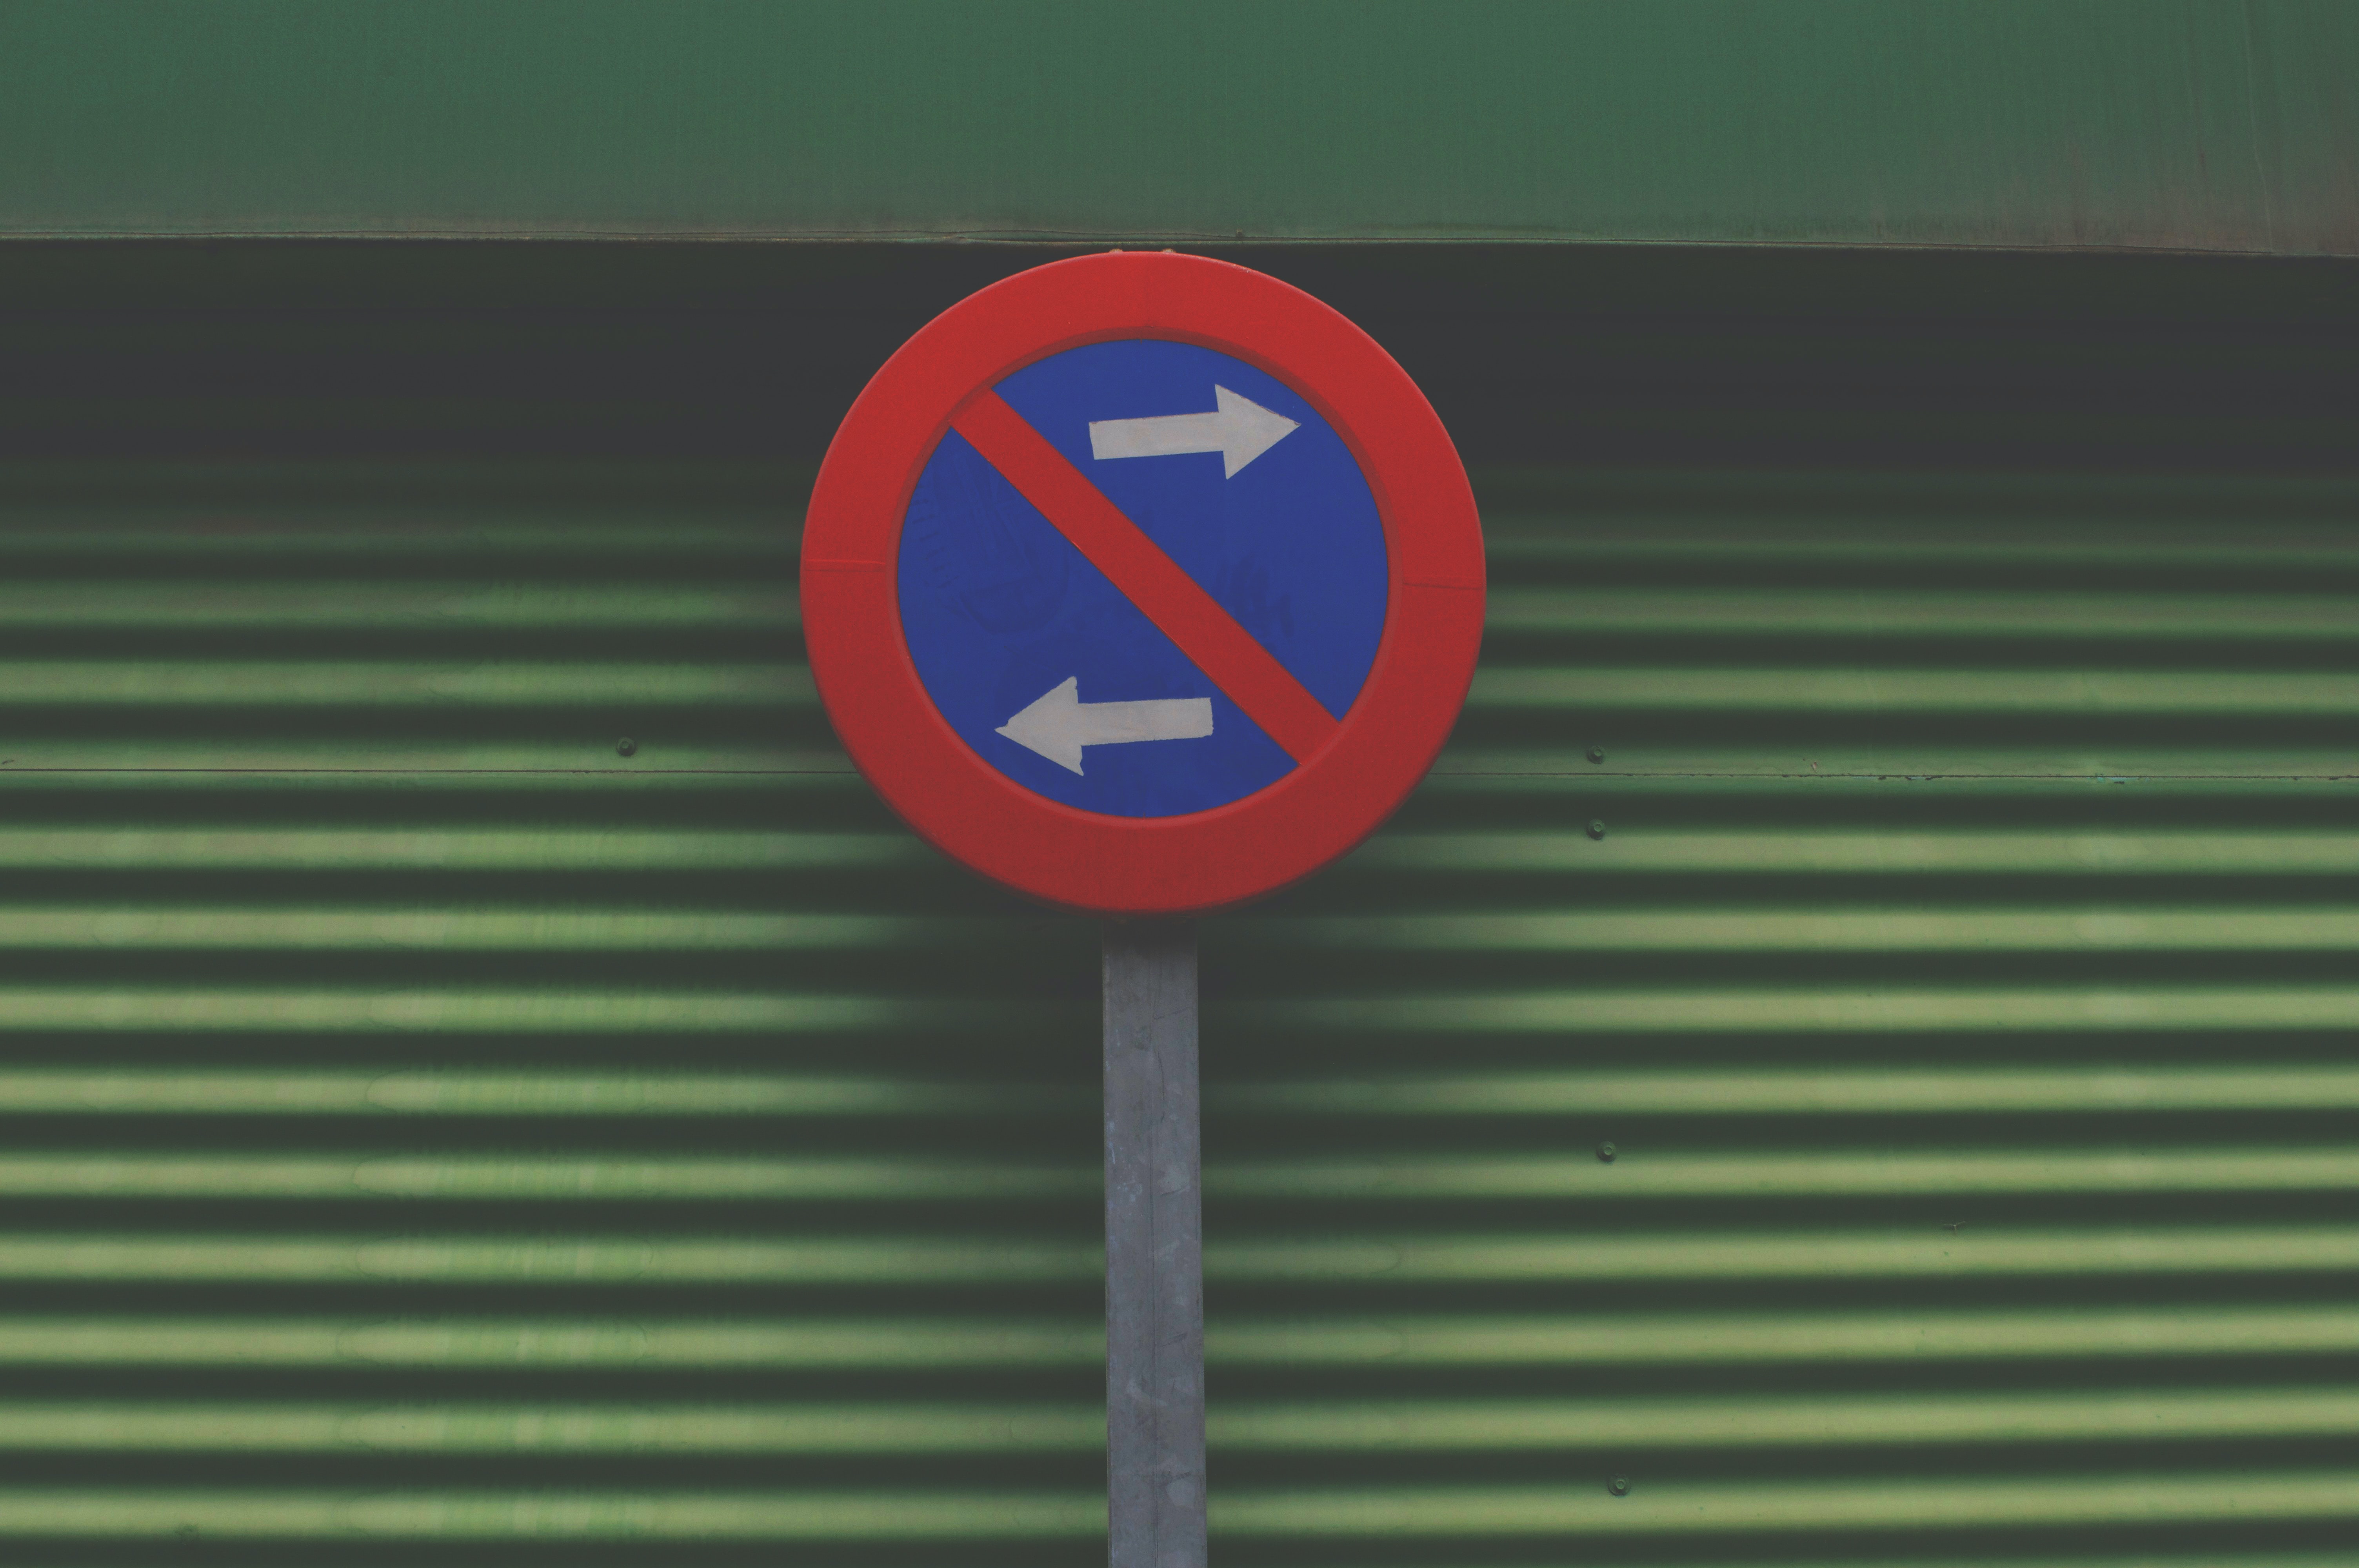 A circular sign stands against a textured army green wall. The sign is royal blue with a red border and two white arrows, one pointing left, the other pointing right.